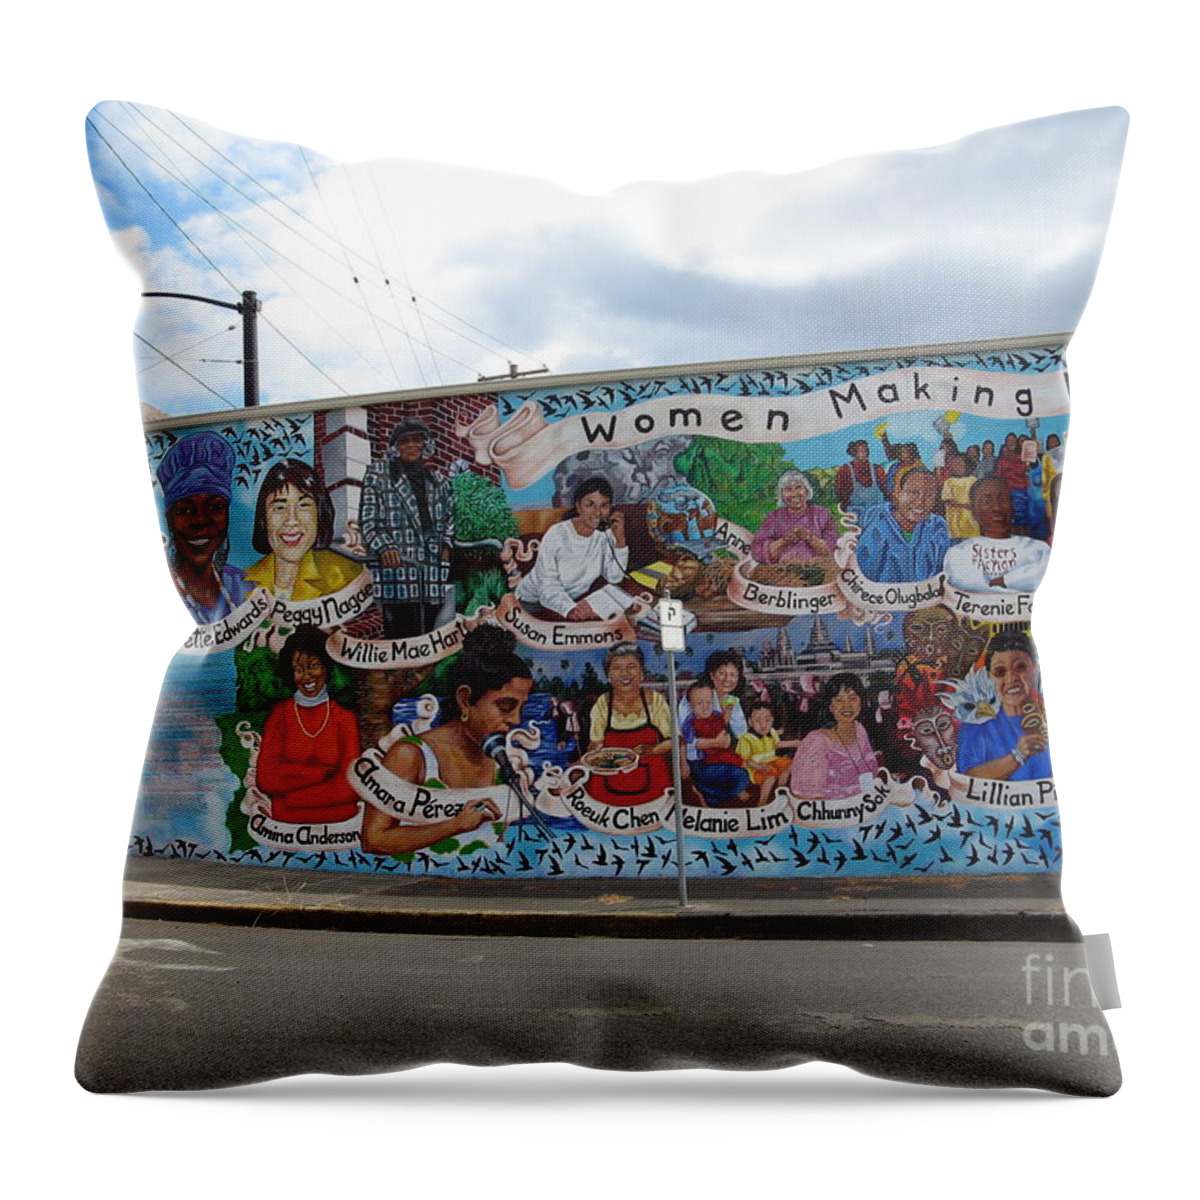 Mural Throw Pillow featuring the photograph Women Making History Mural by Mars Besso